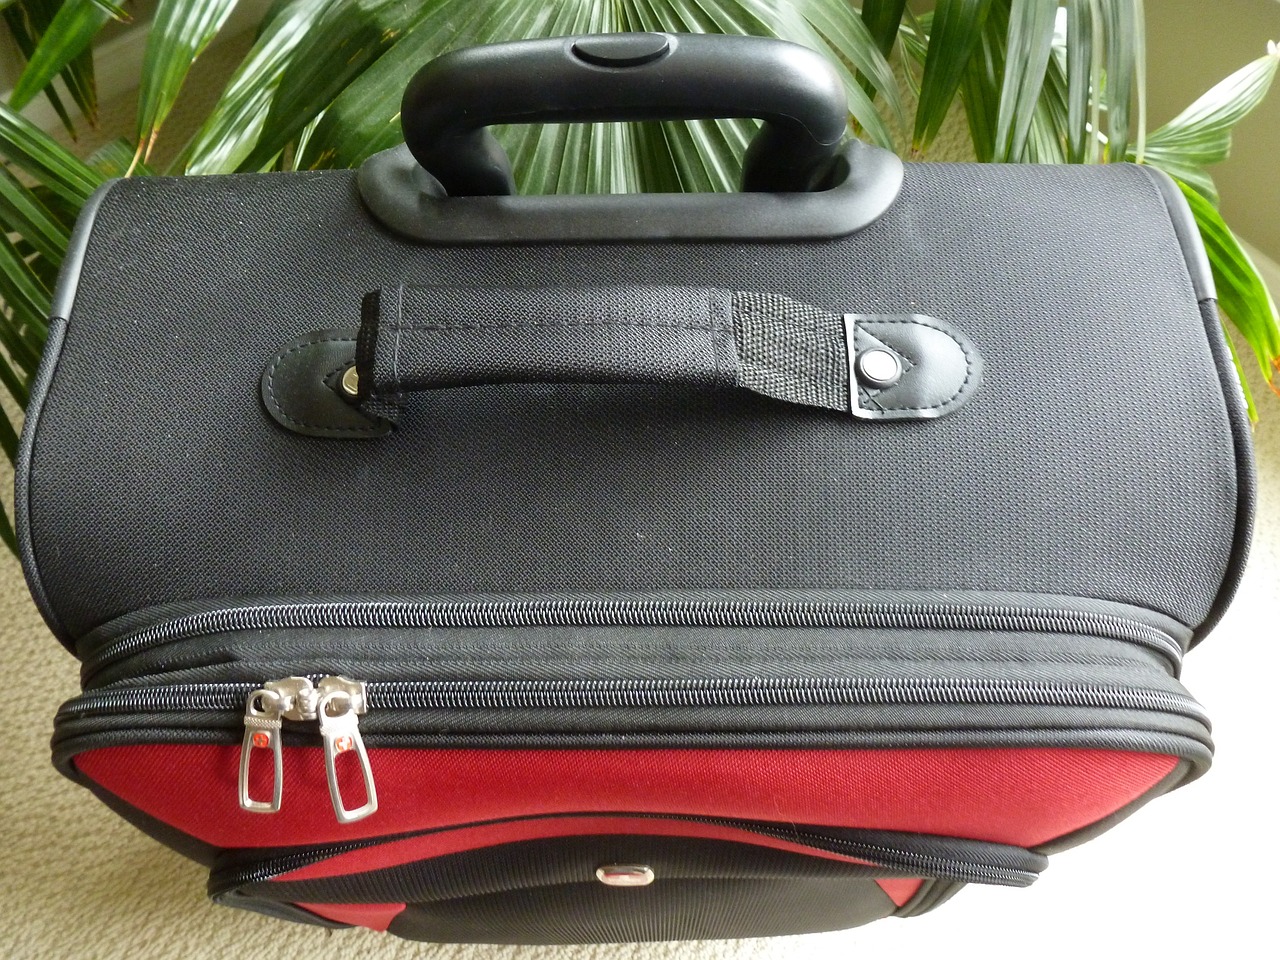 How to Clean Luggage Bag at Home